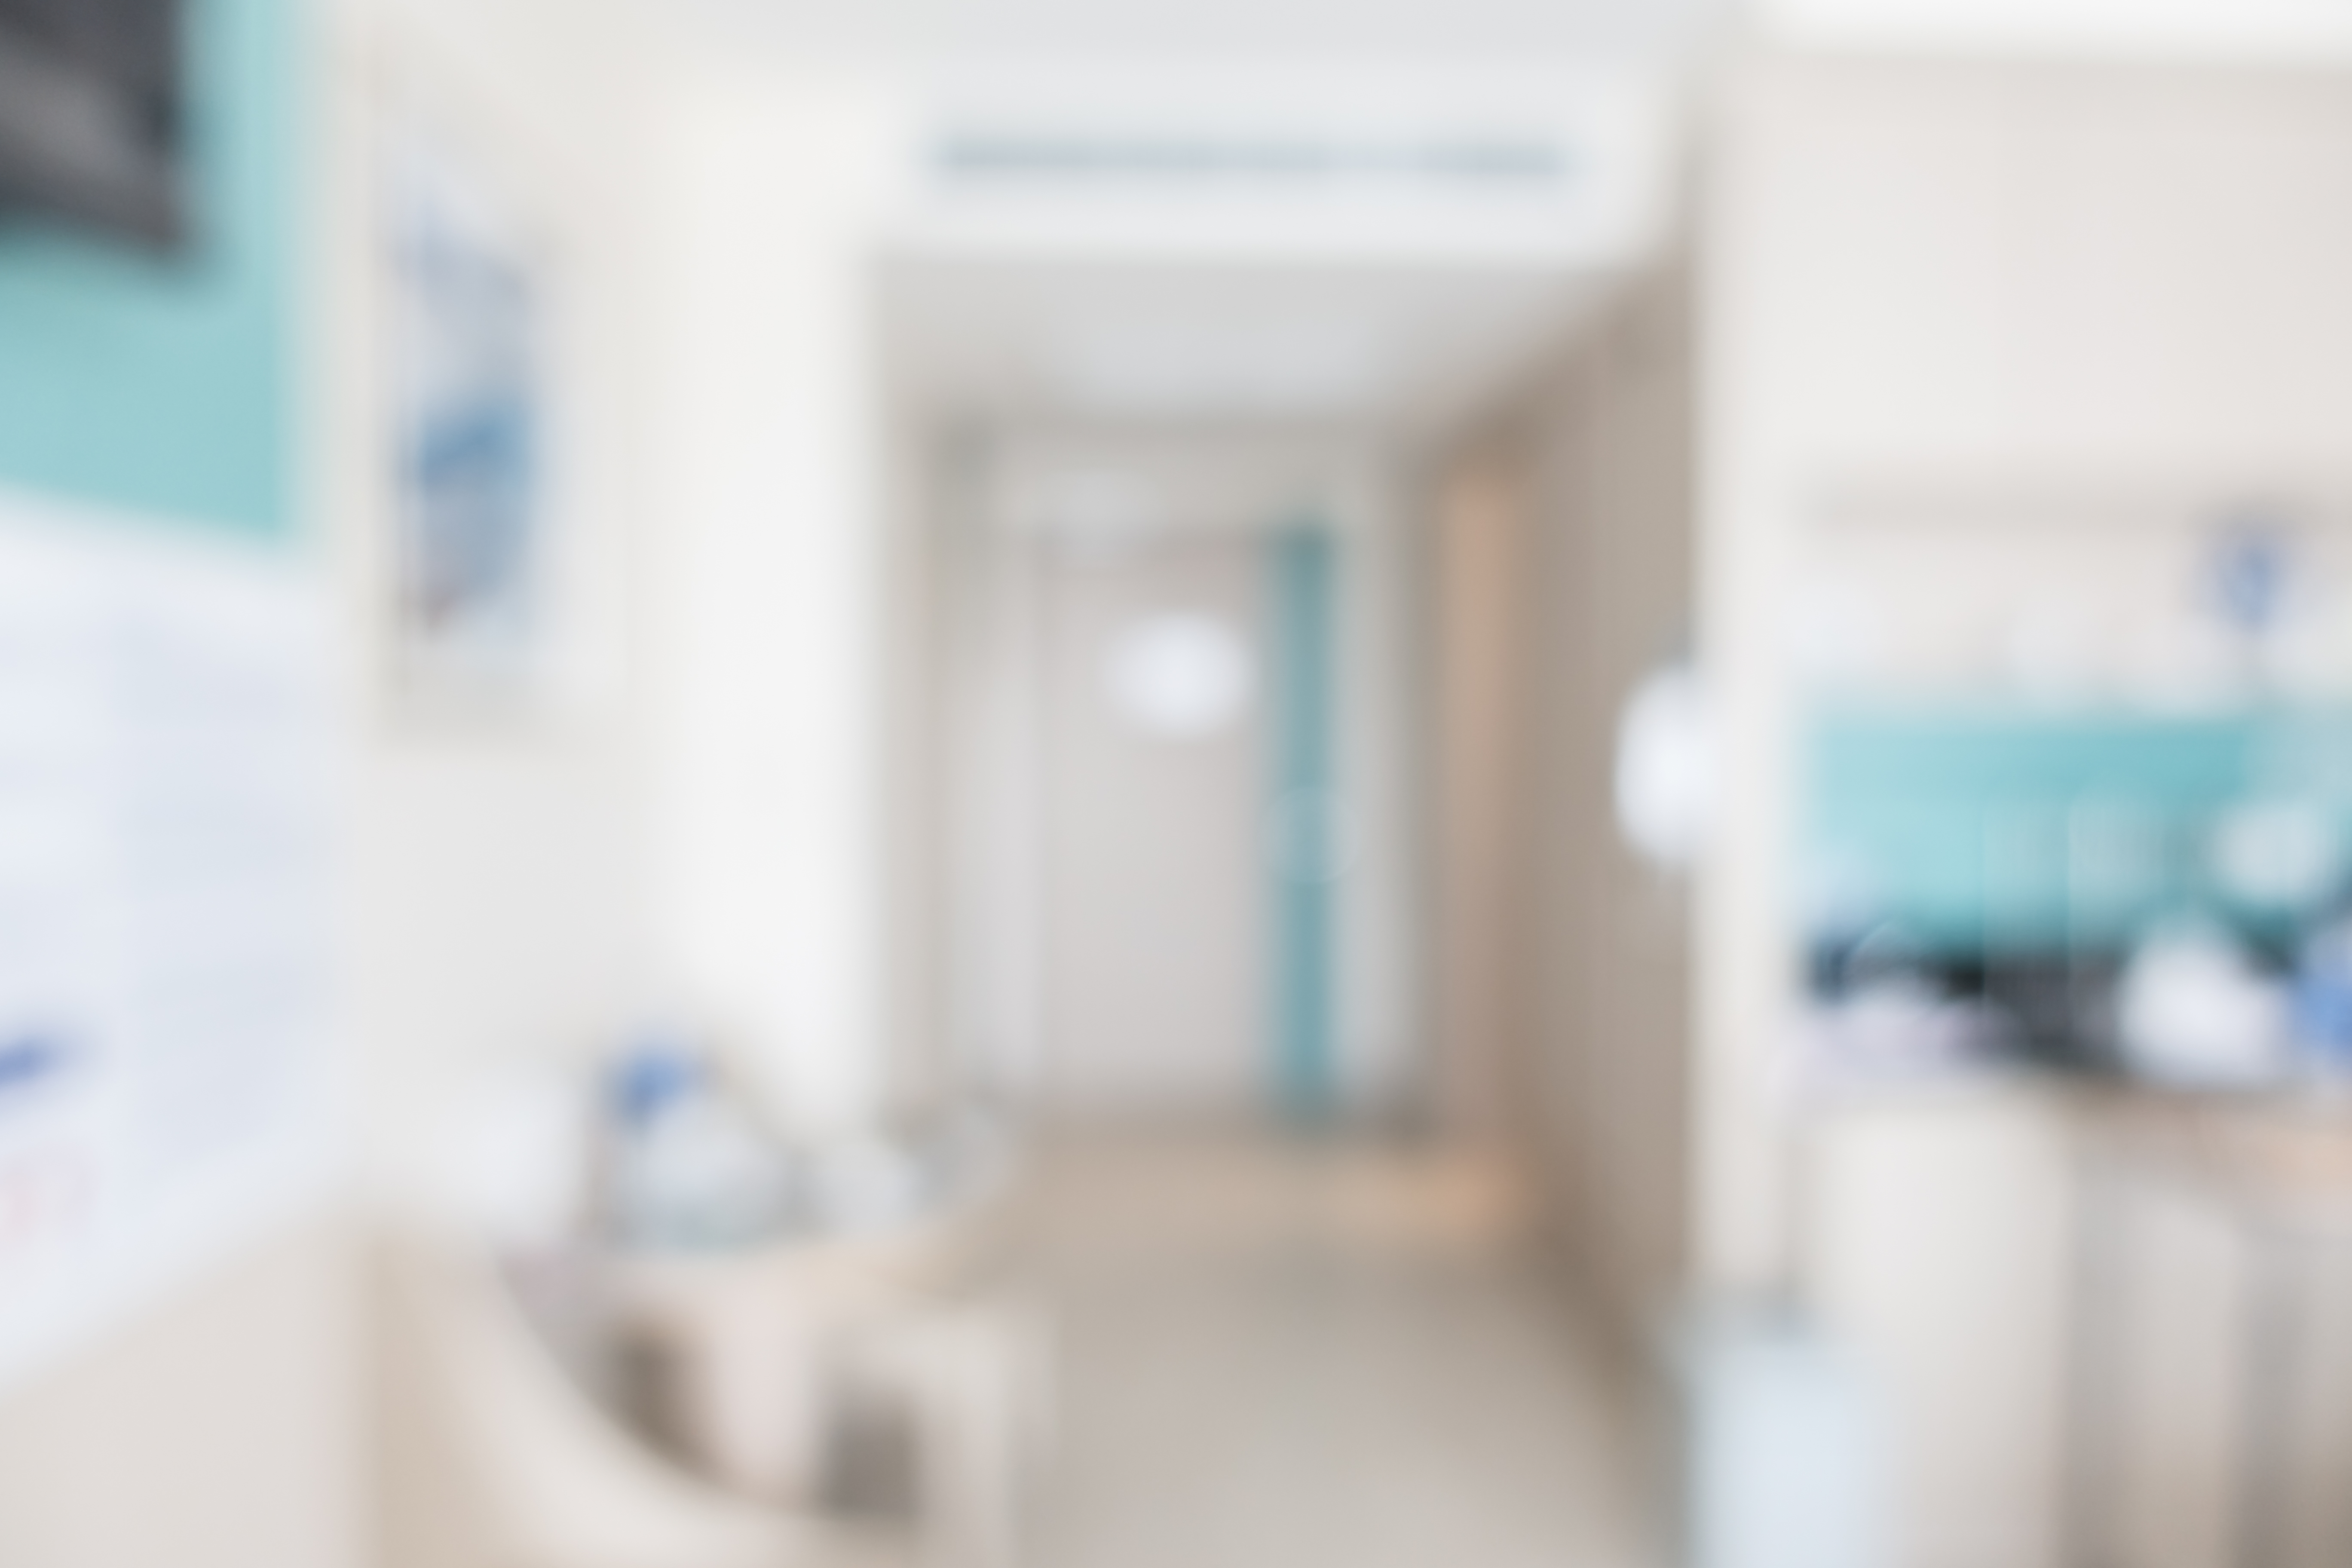 Abstract blur hospital room | Source: Shutterstock